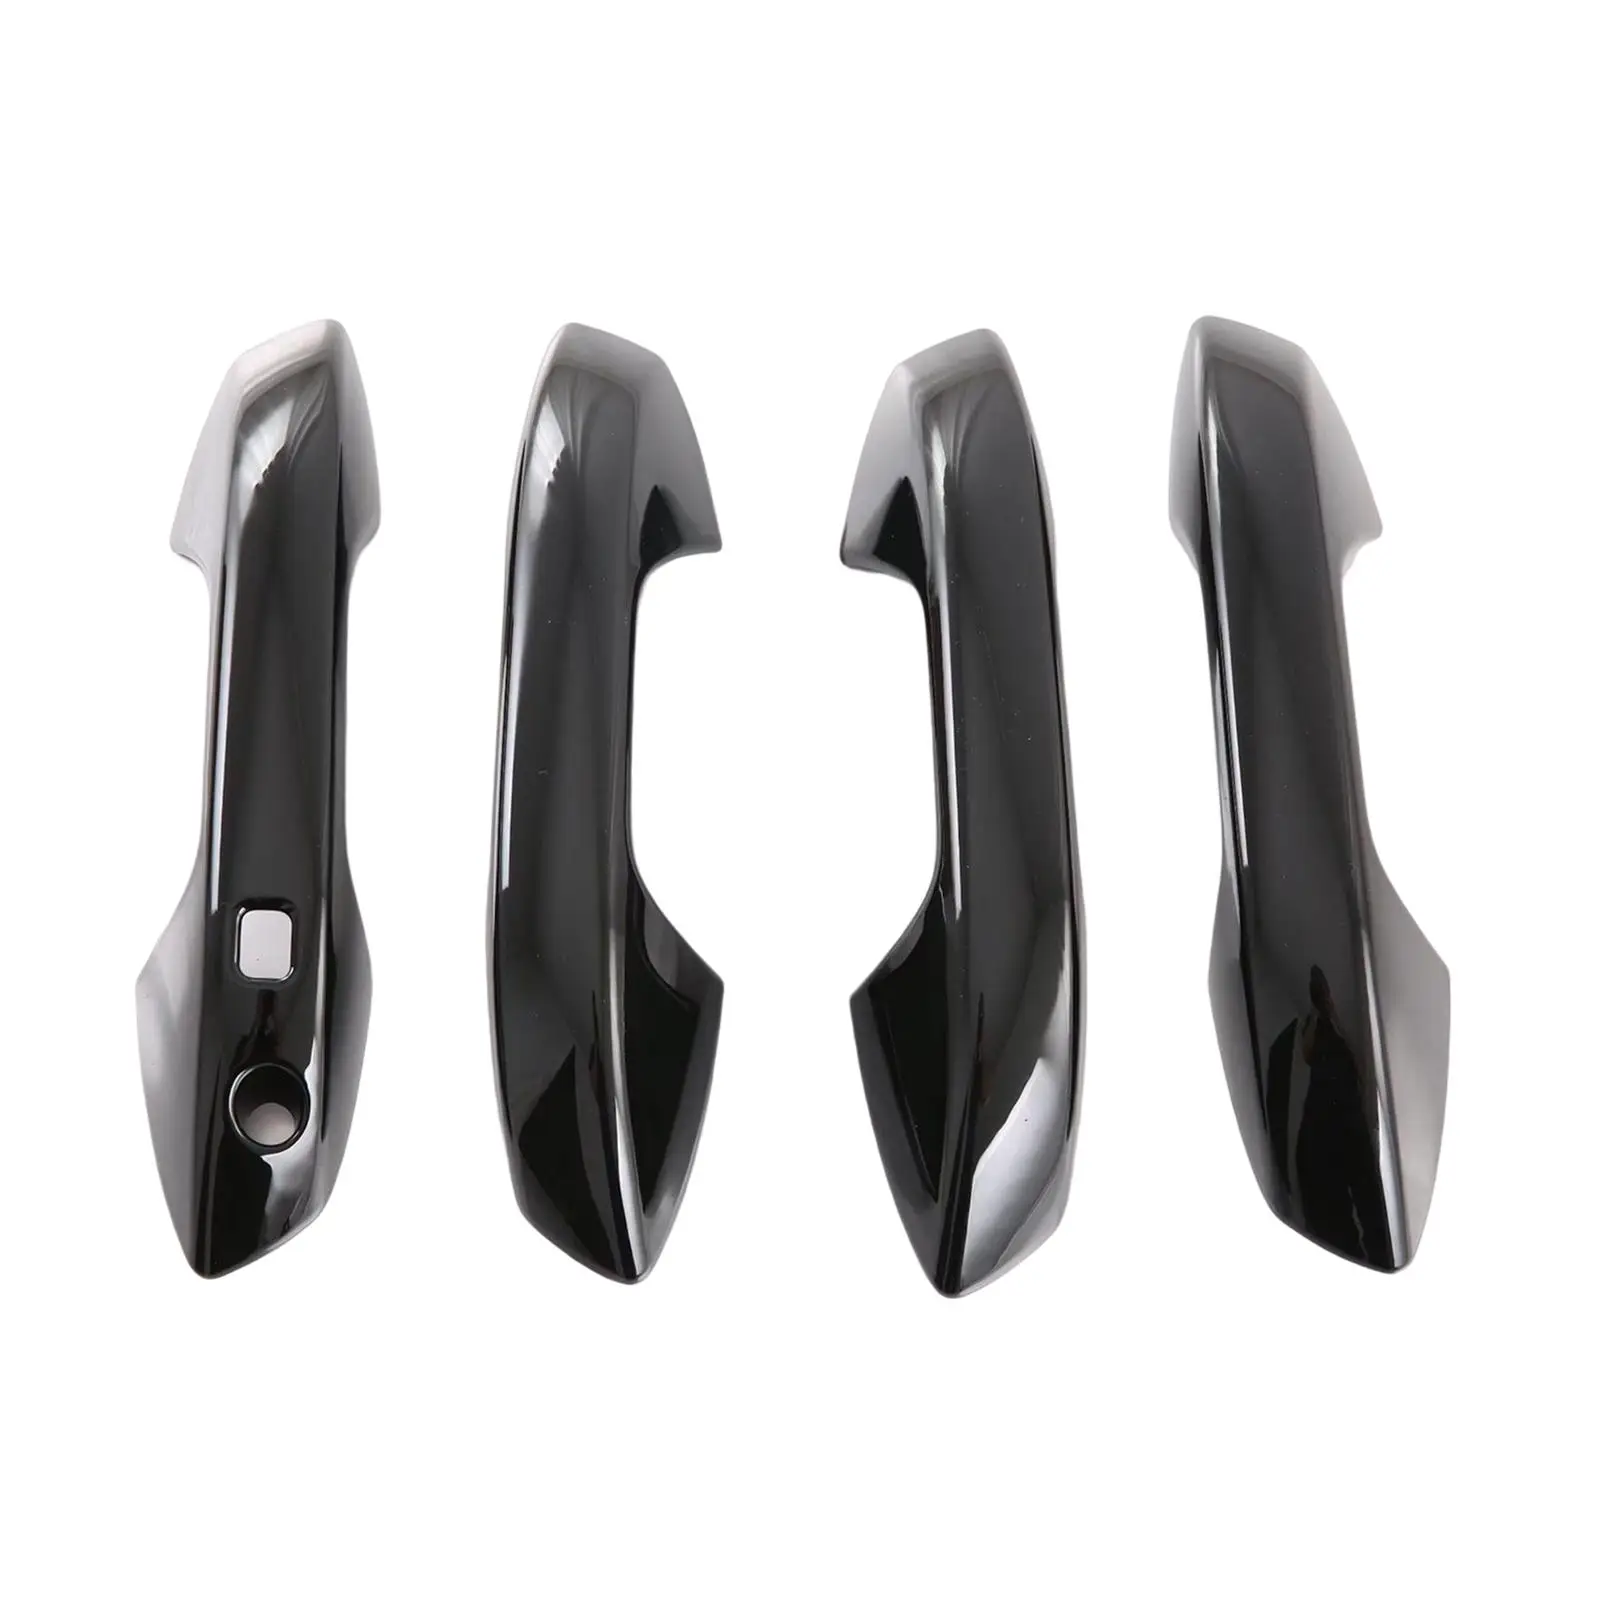 4x Car Door Handle Frame Cover Scratch Resistant for Byd Yuan Plus